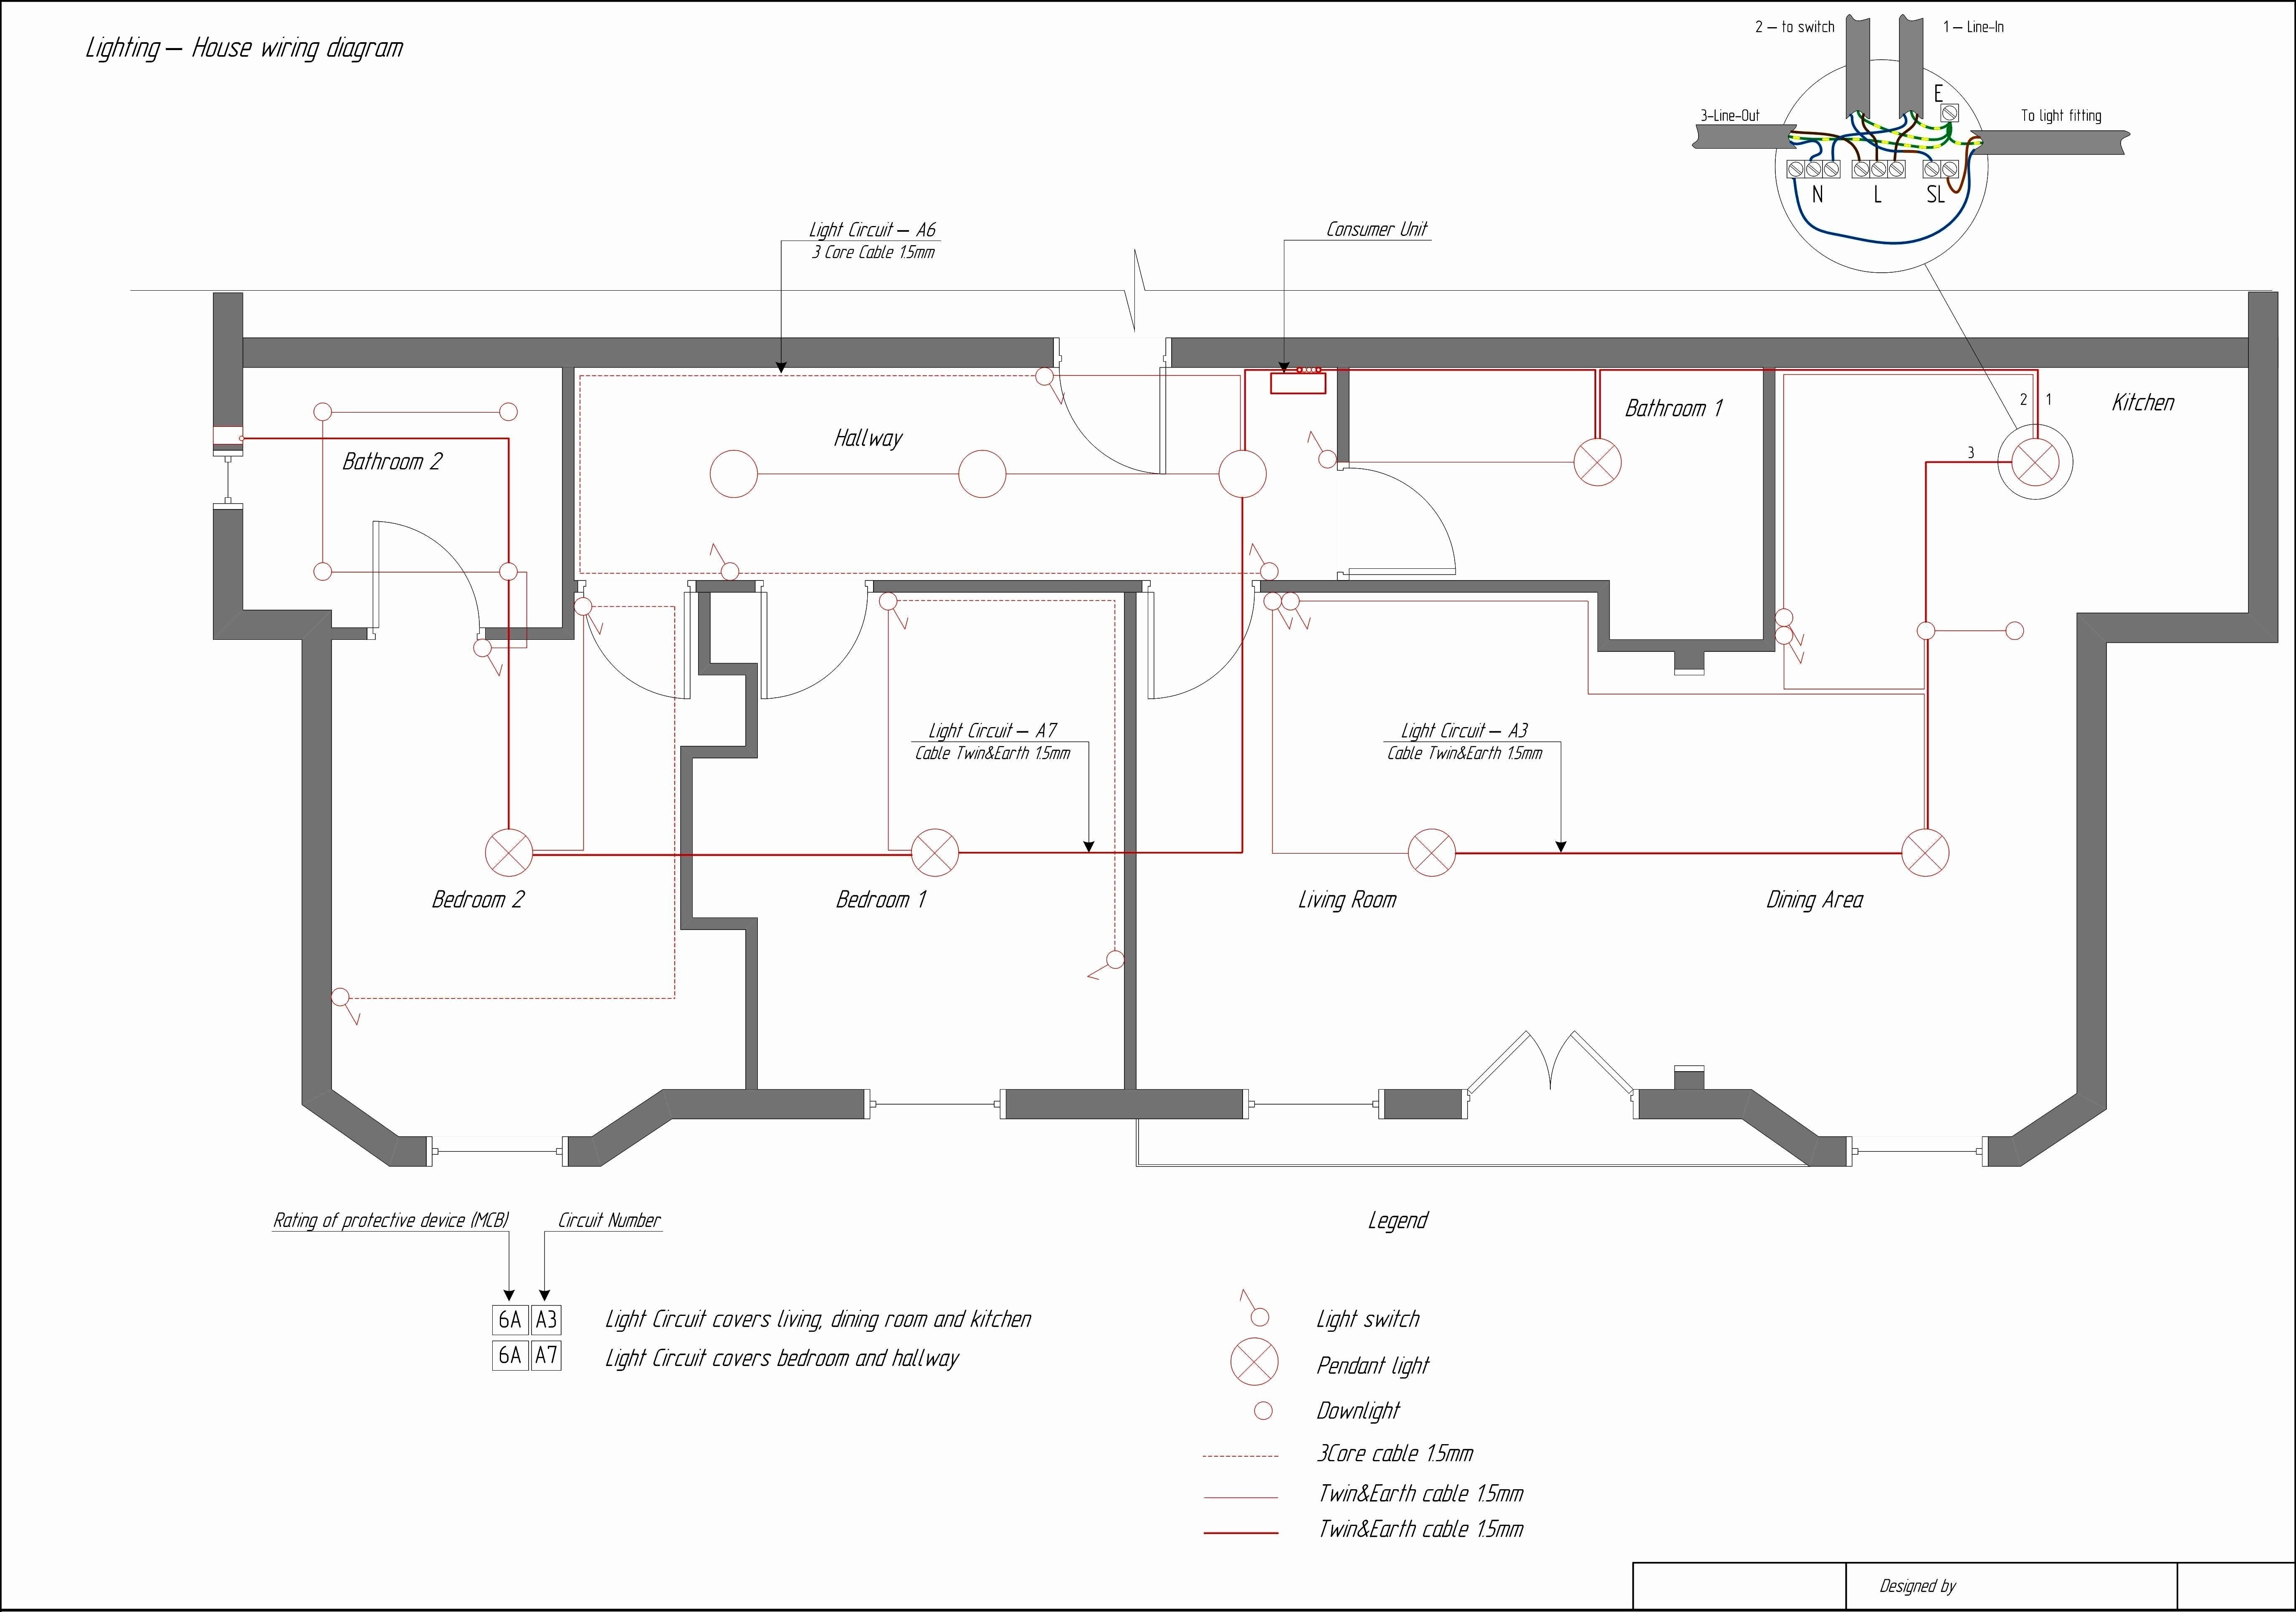 Phone Wiring Diagram Best 2 Lights 2 Switches Diagram Unique Wiring A Light Fitting Diagram 0d